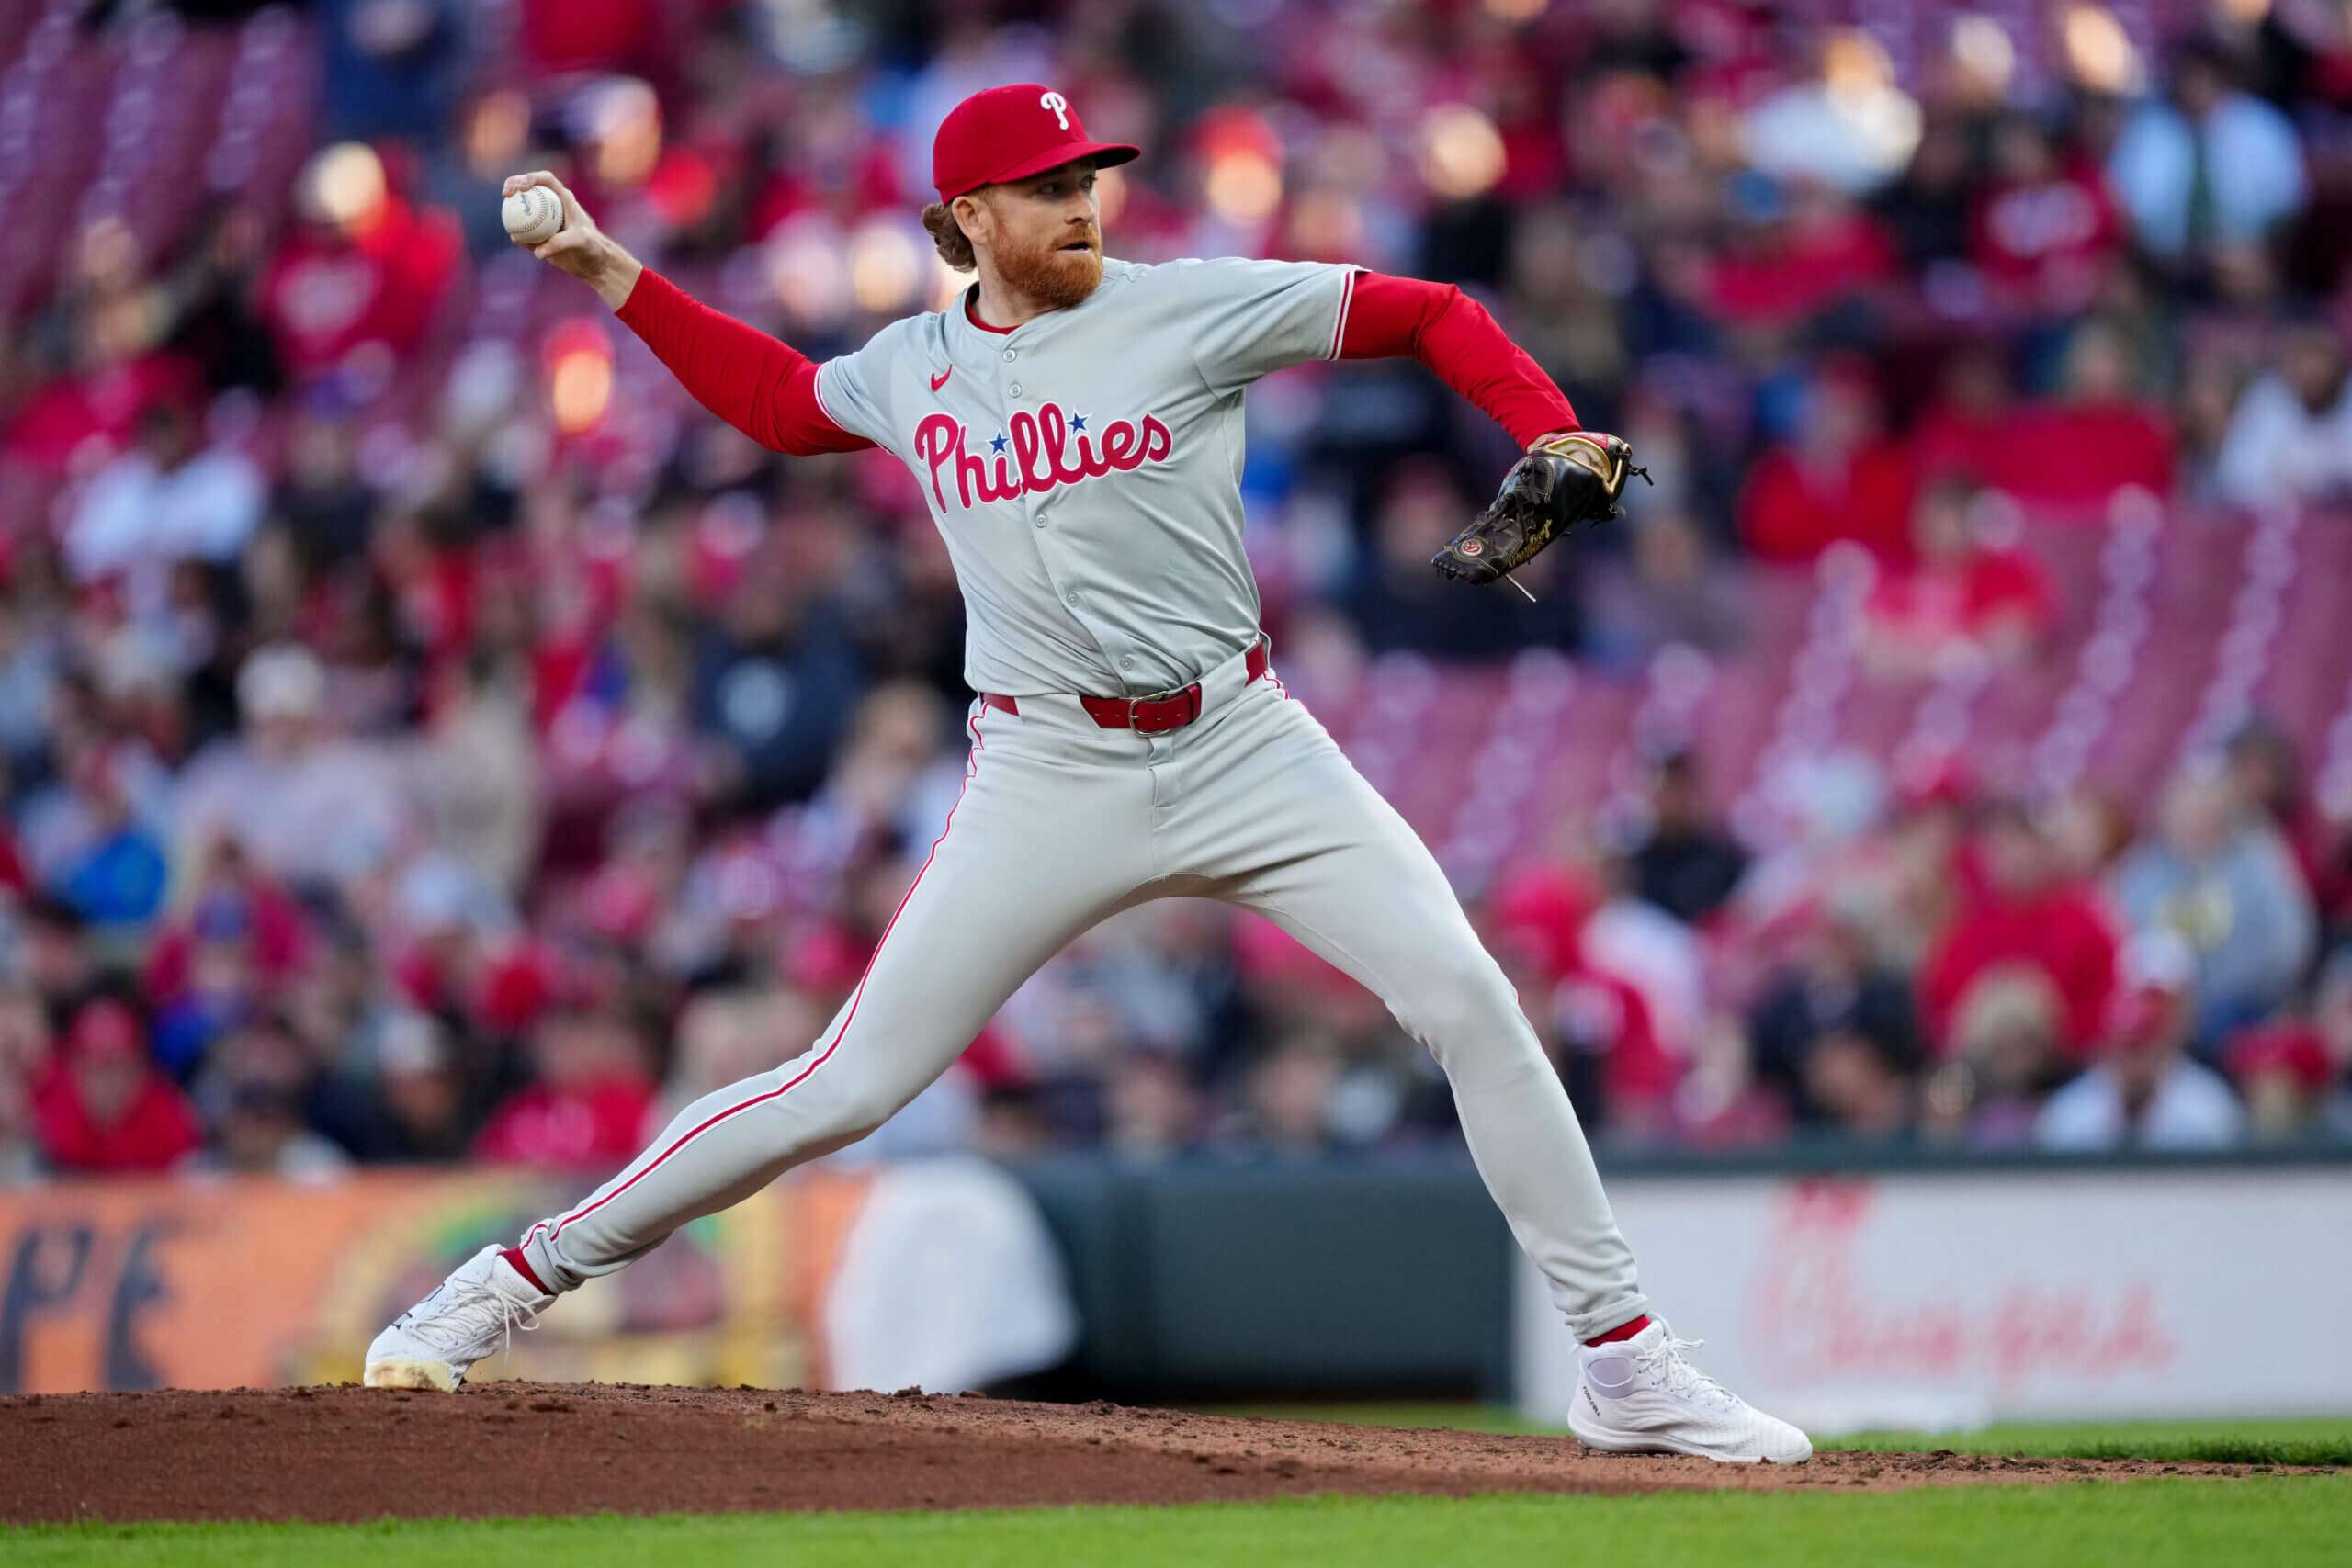 Spencer Turnbull and his 1.33 ERA are likely headed to Phillies bullpen